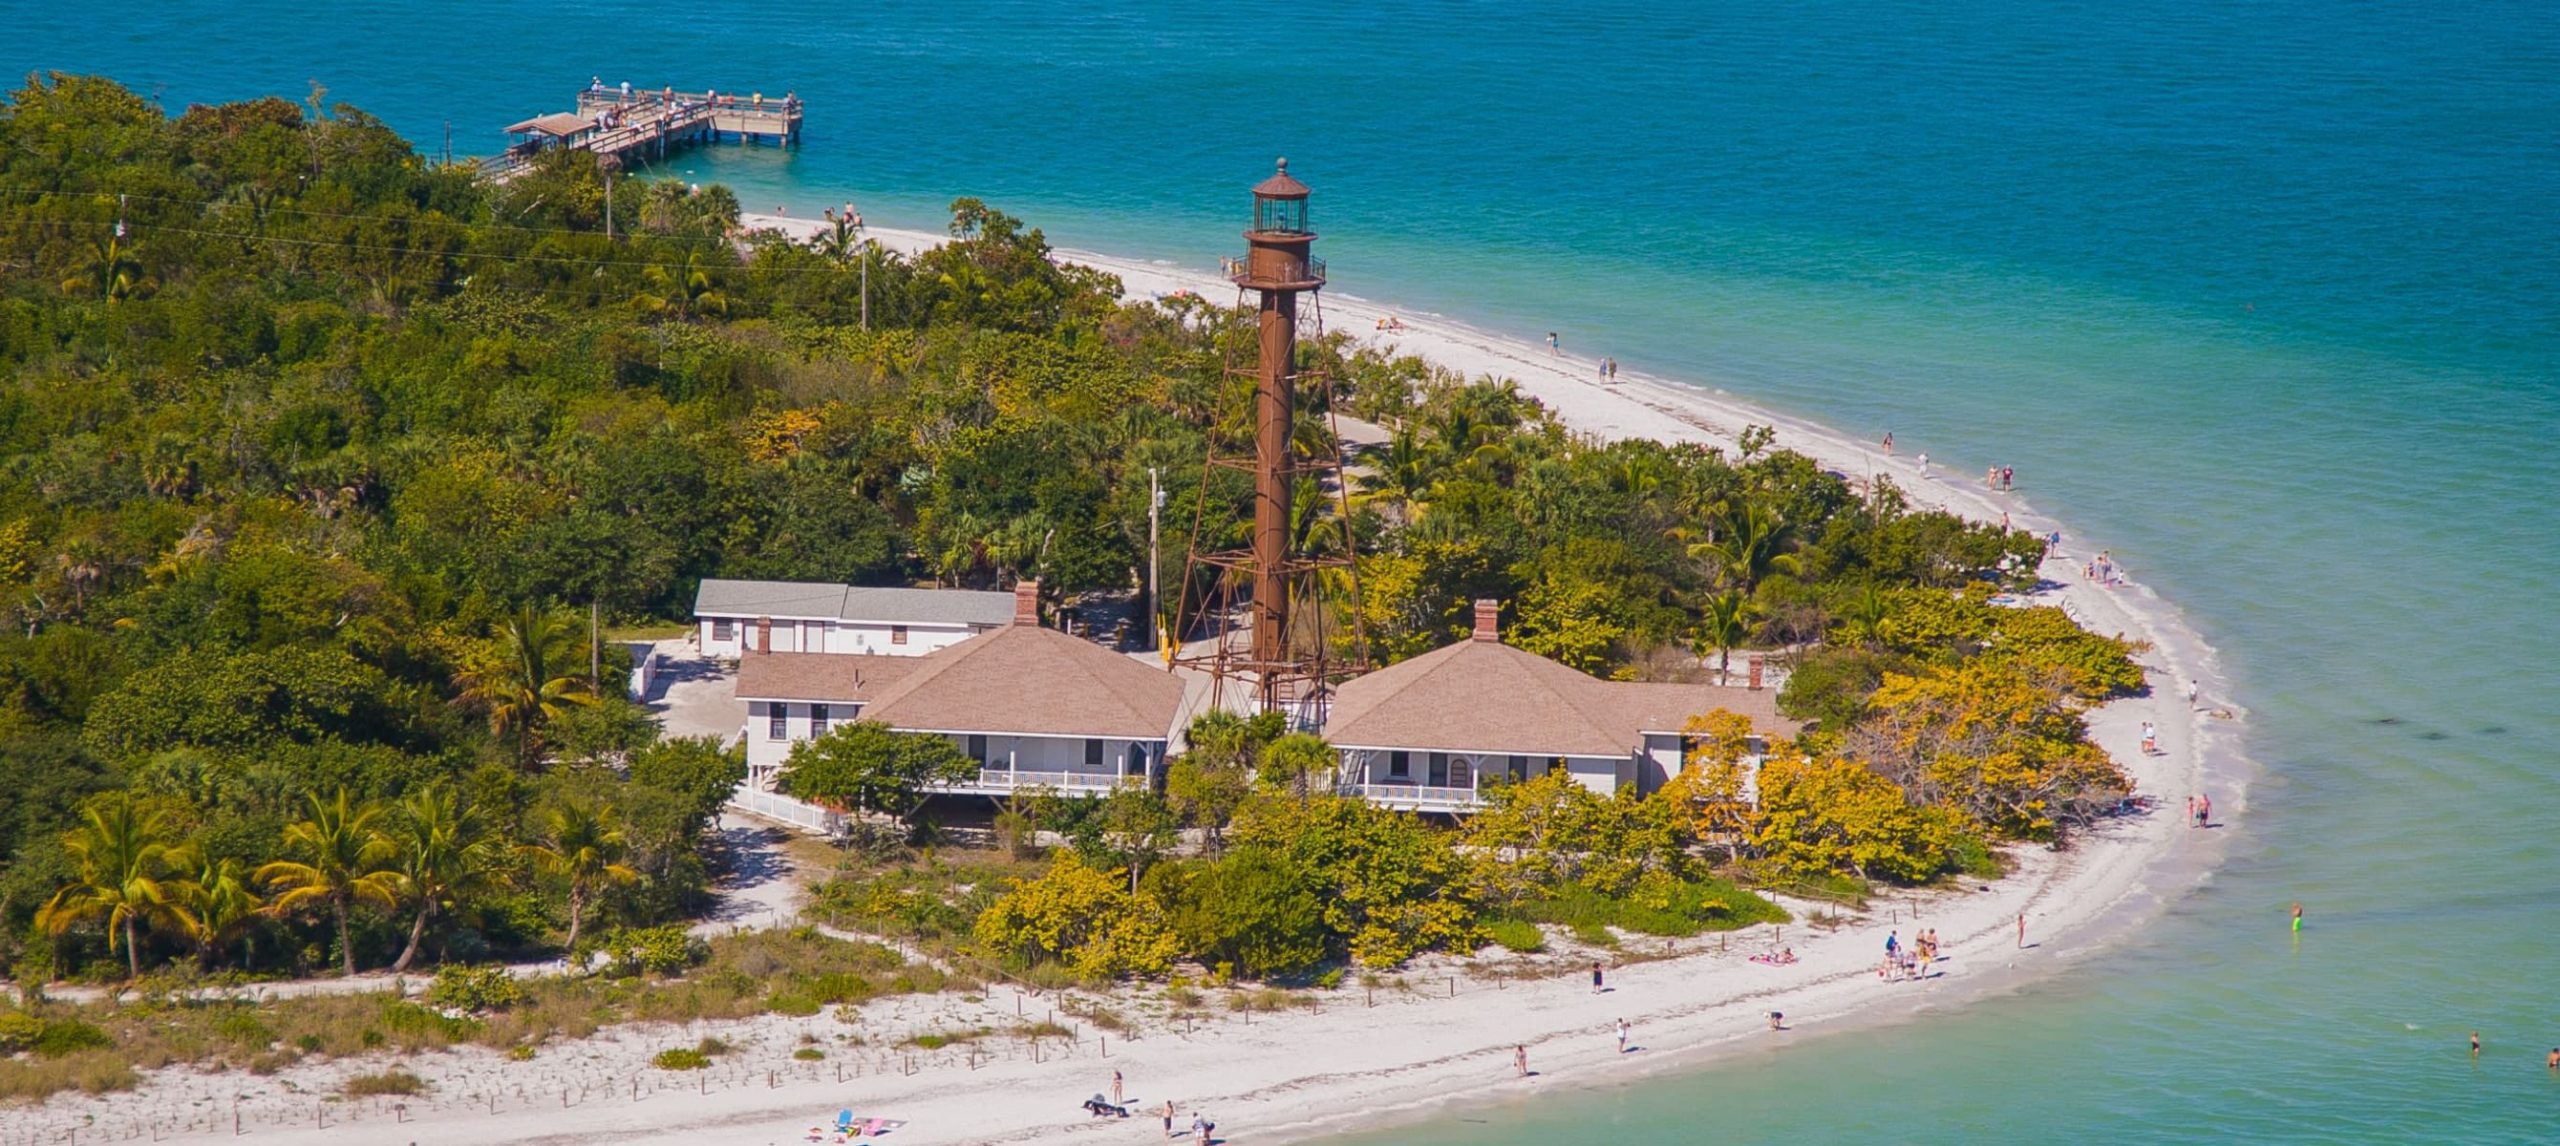 The 9 Top Things to do on Sanibel Island, Florida